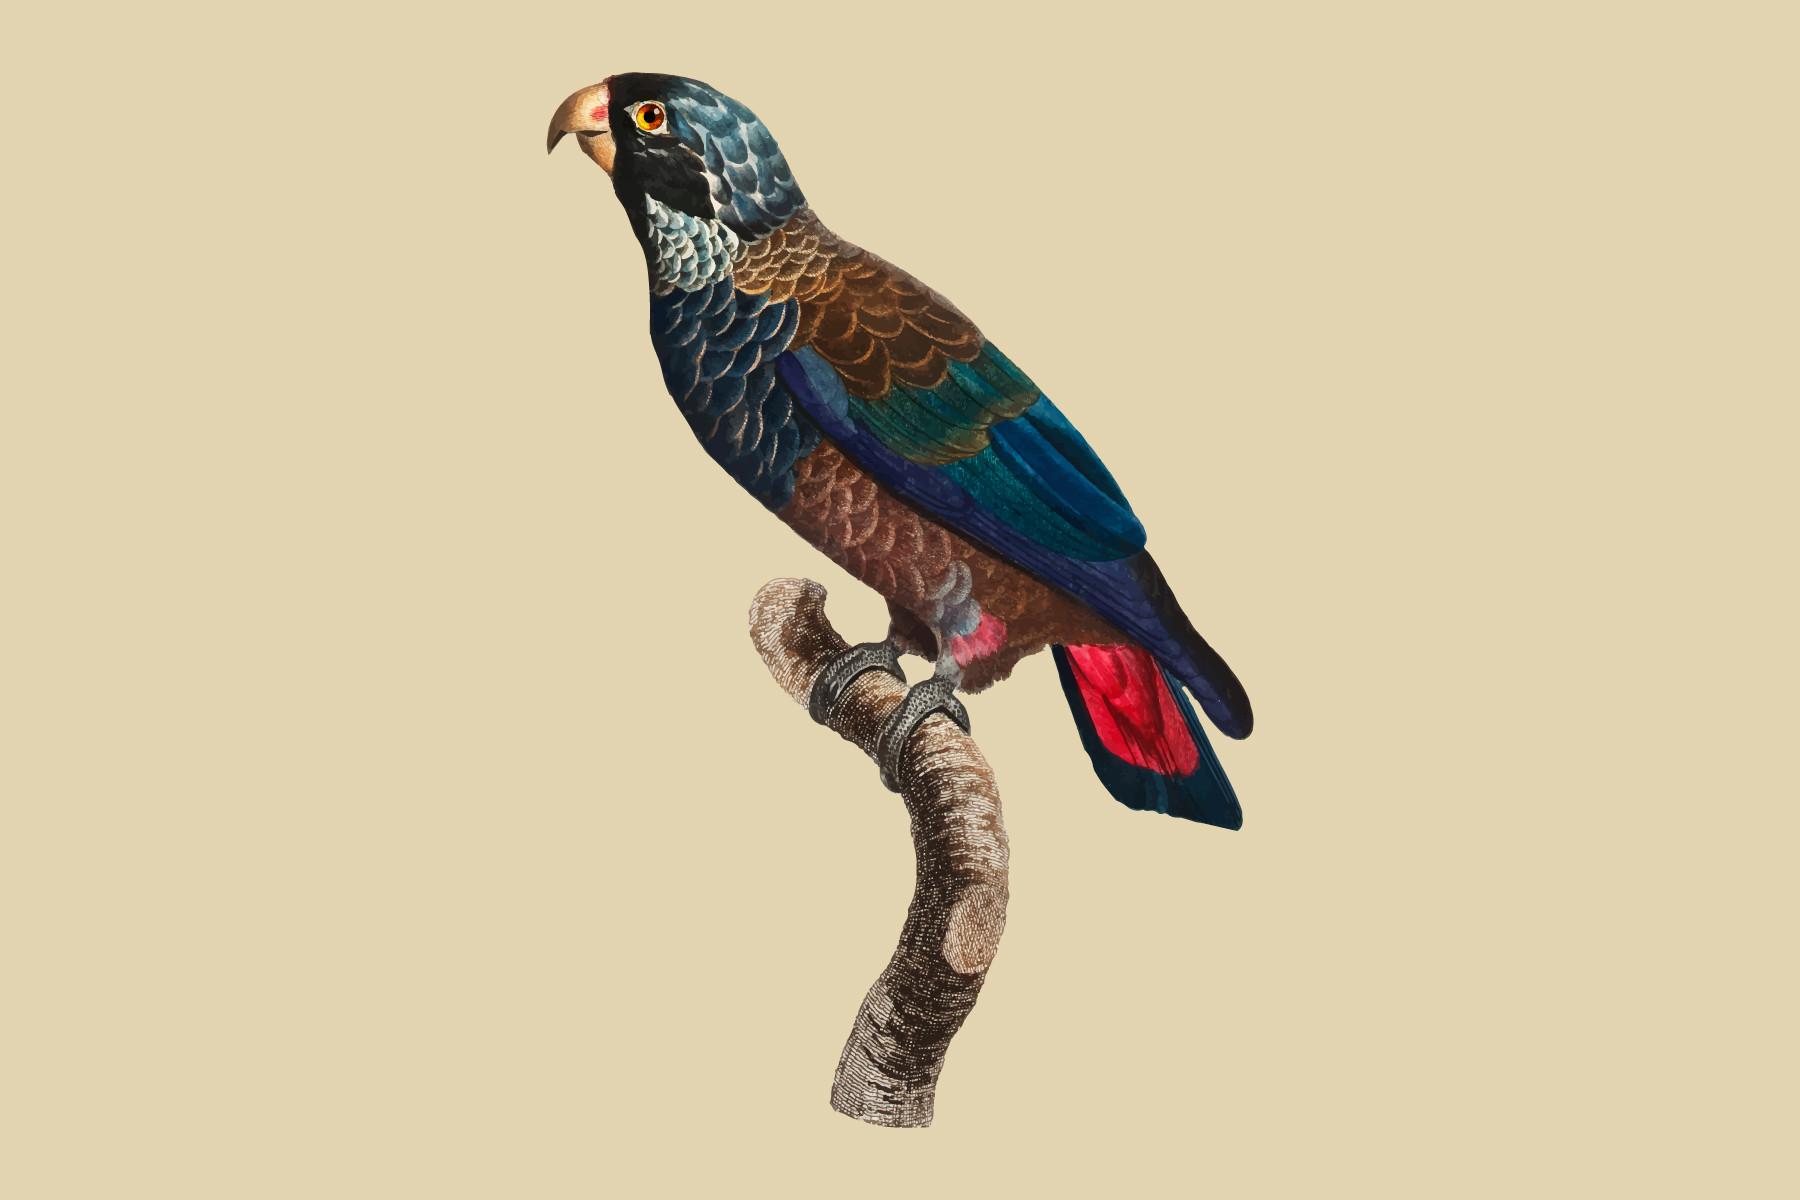 The Bronze-Winged Parrot Illustration